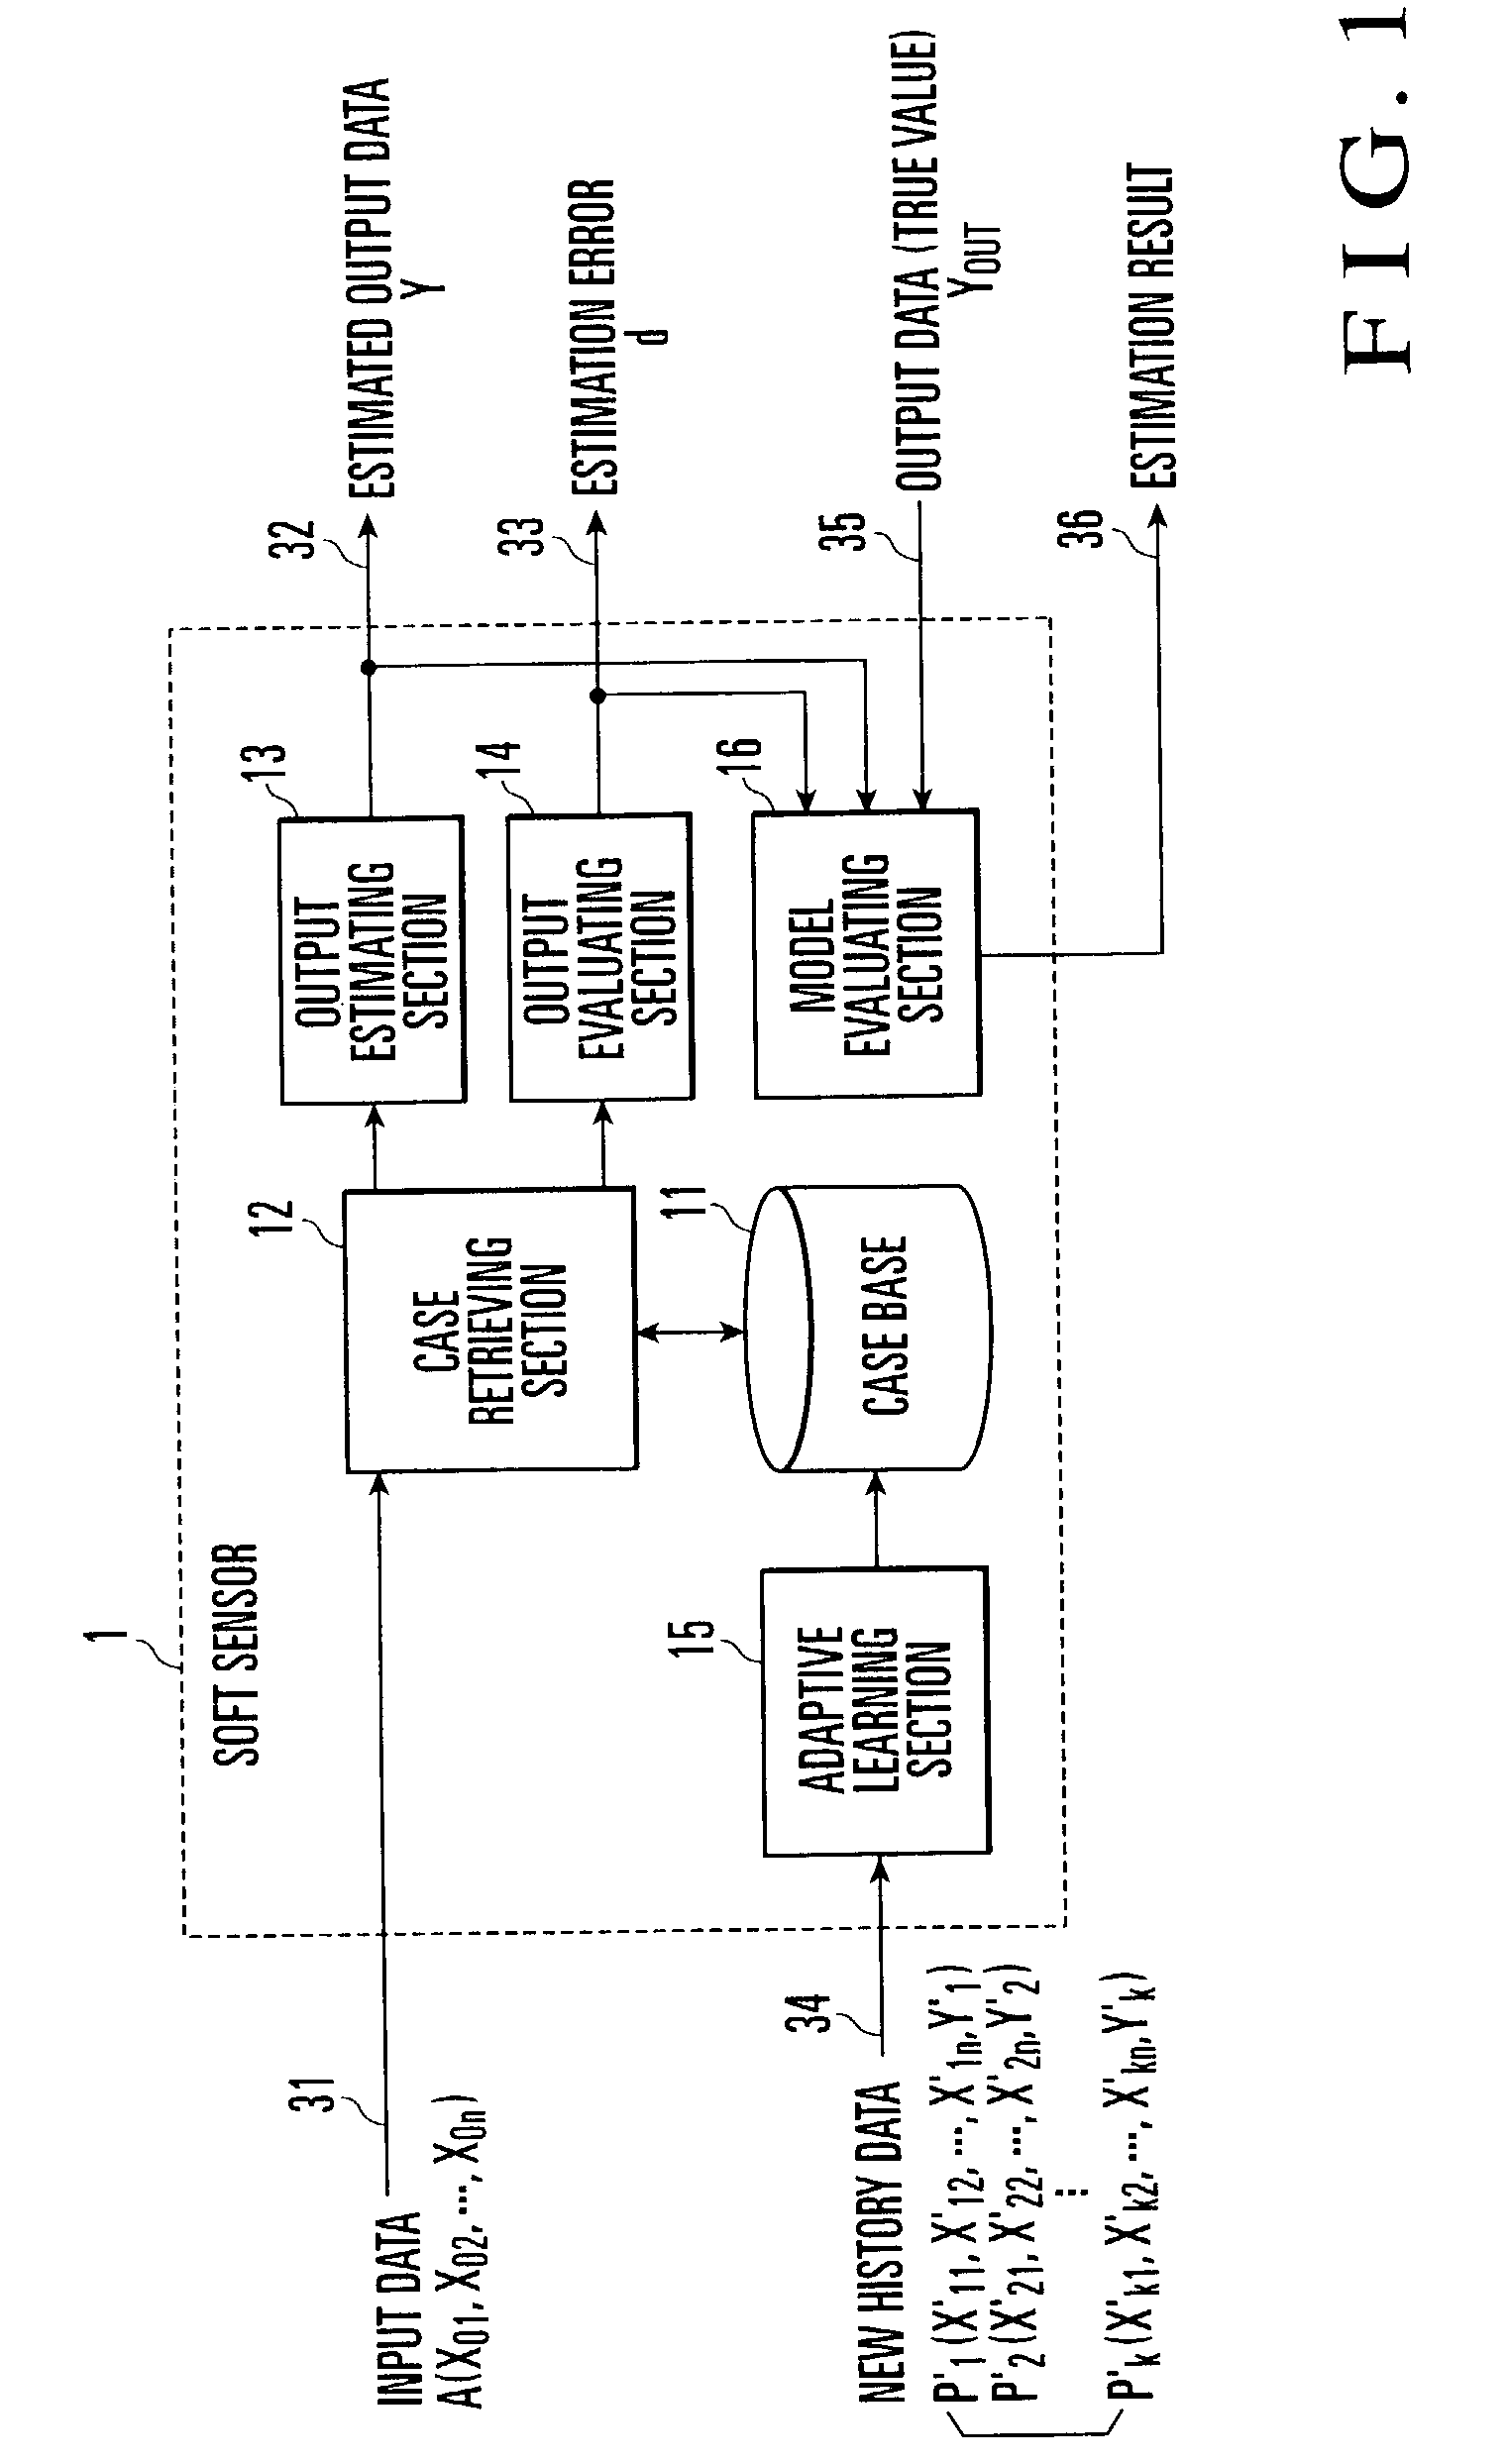 Soft sensor device and device for evaluating the same